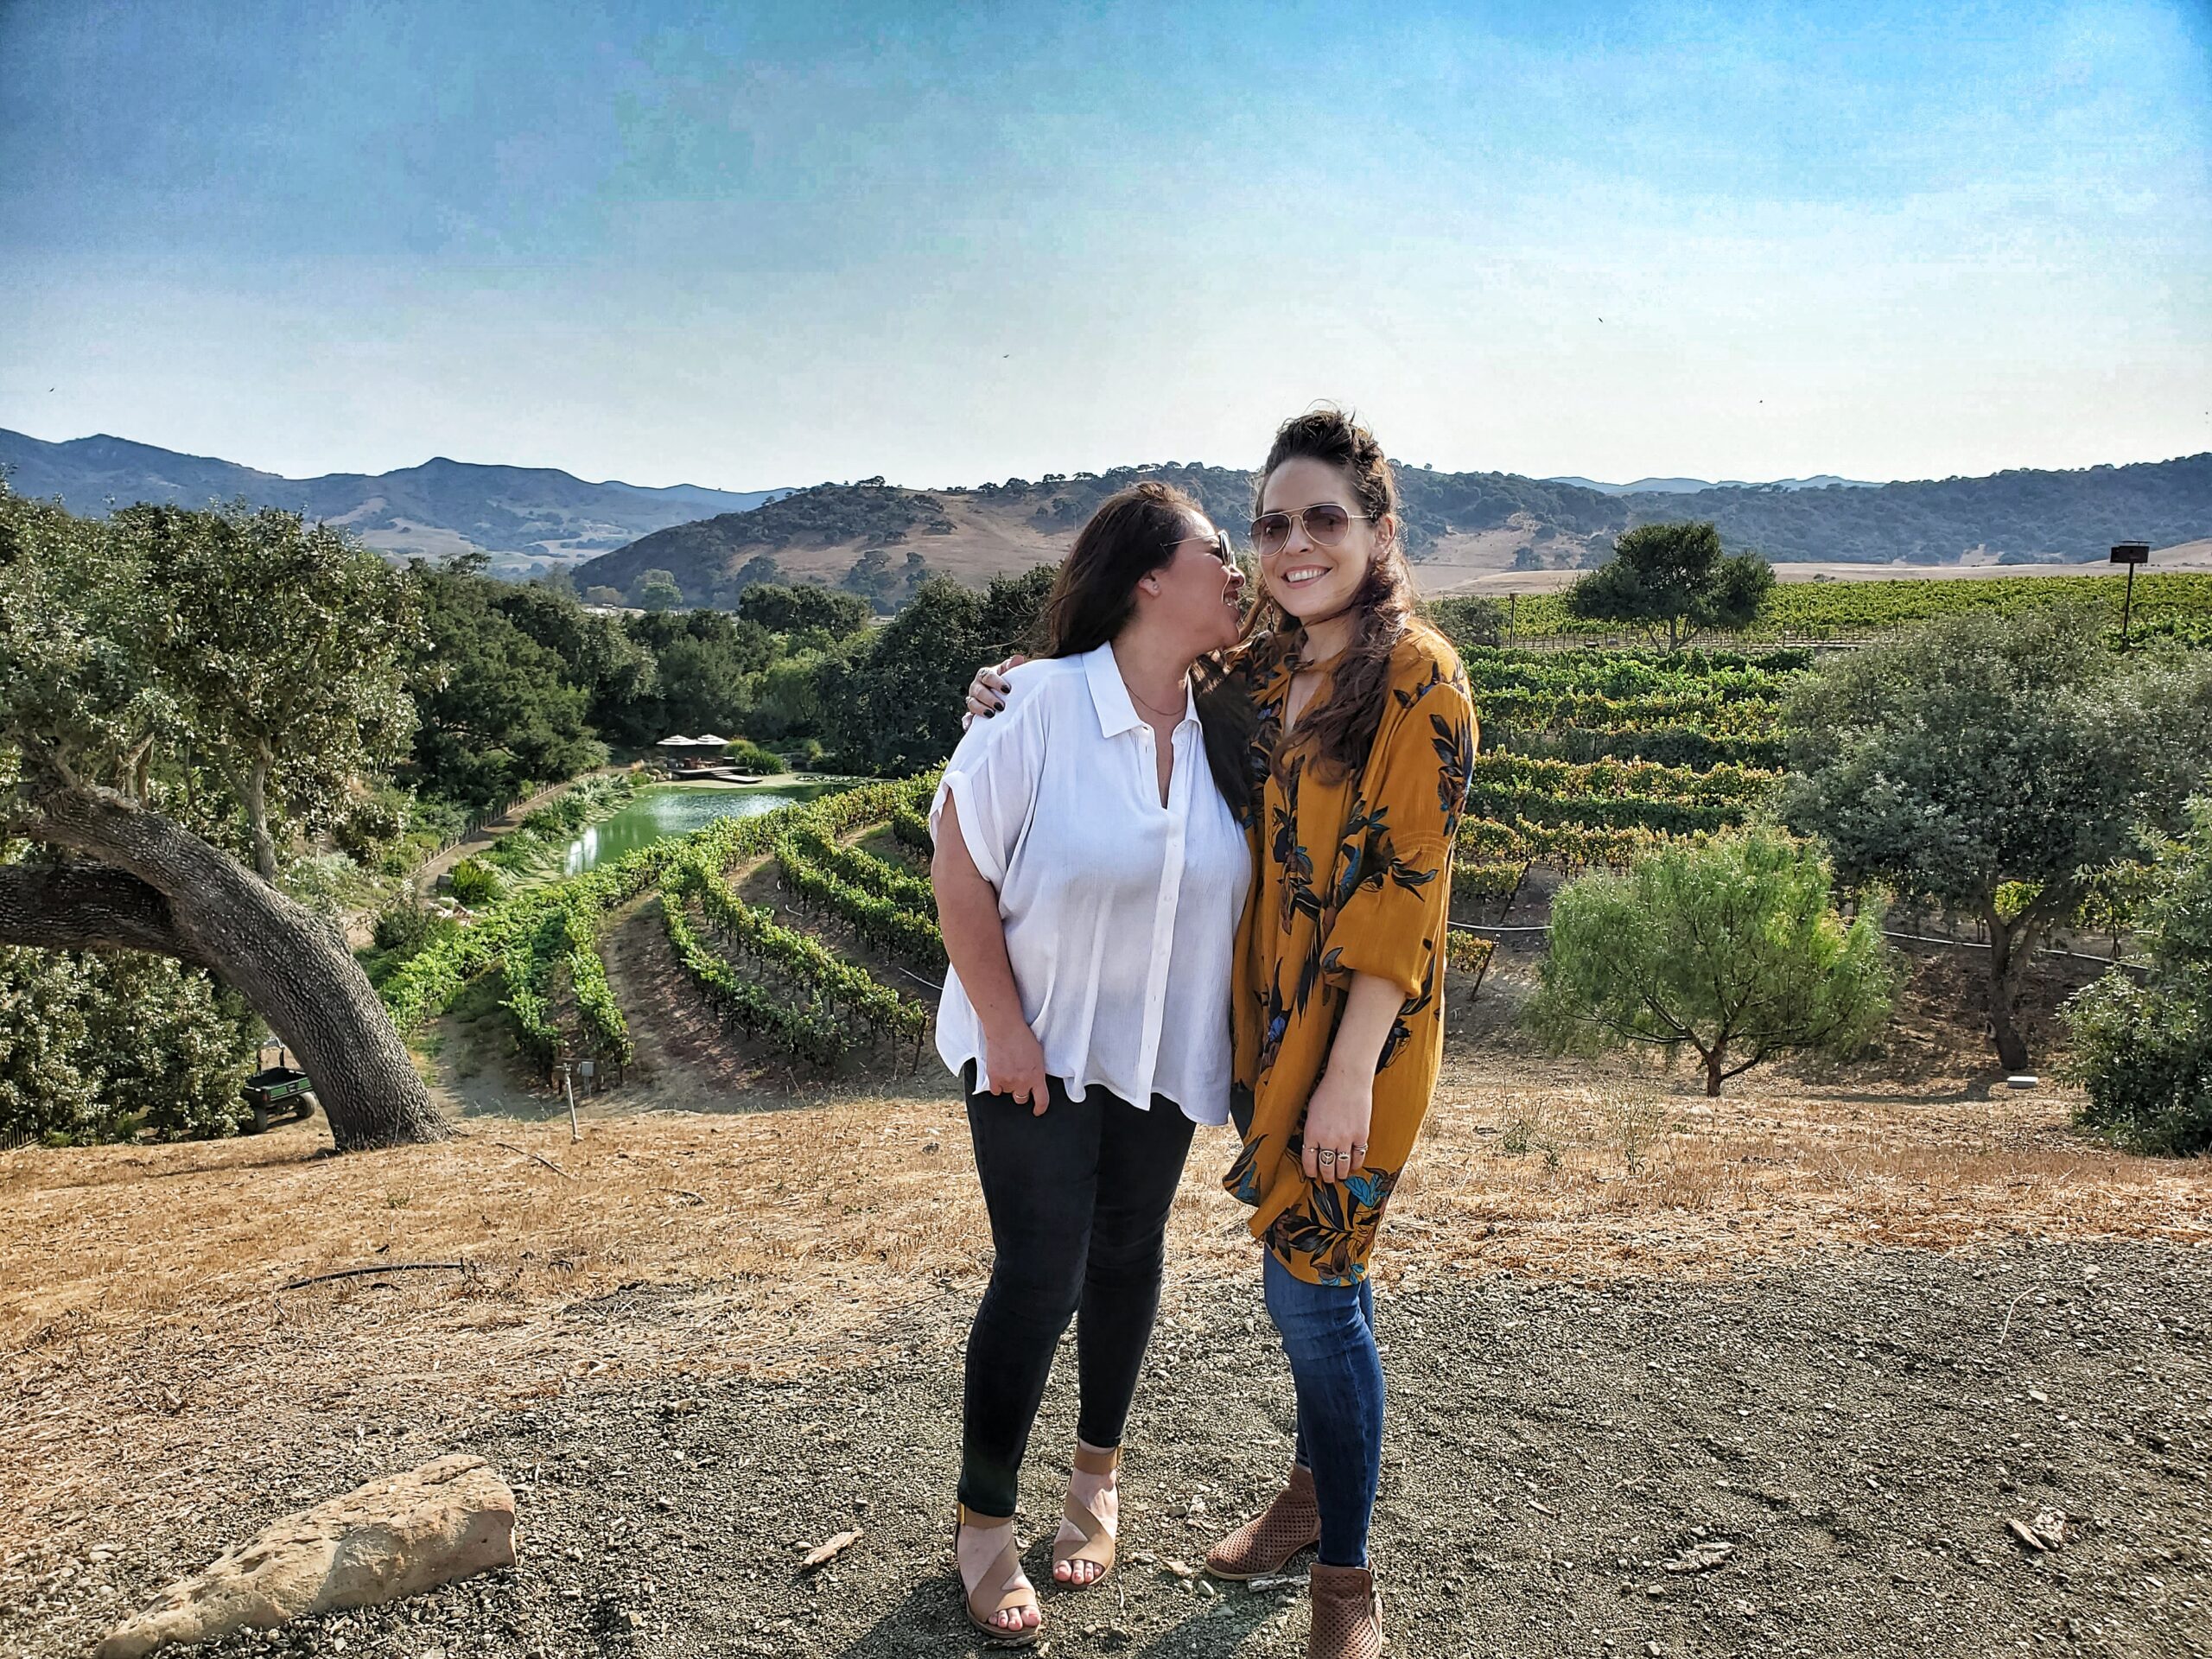 Linds & best friend at Pence Vineyards